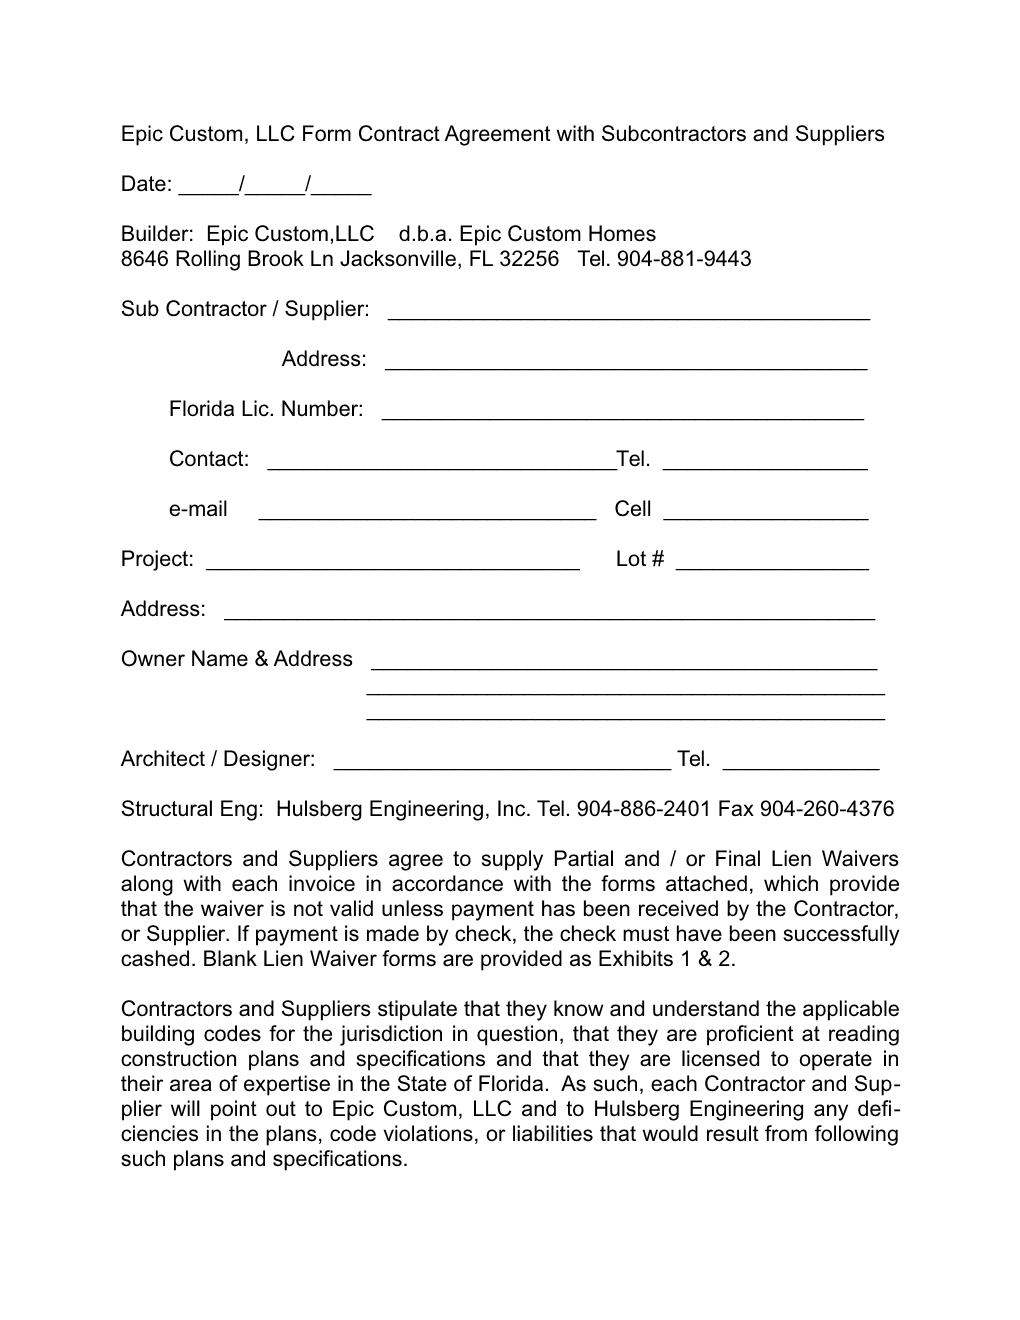 Epic Custom, LLC Form Contract Agreement with Subcontractors and Suppliers